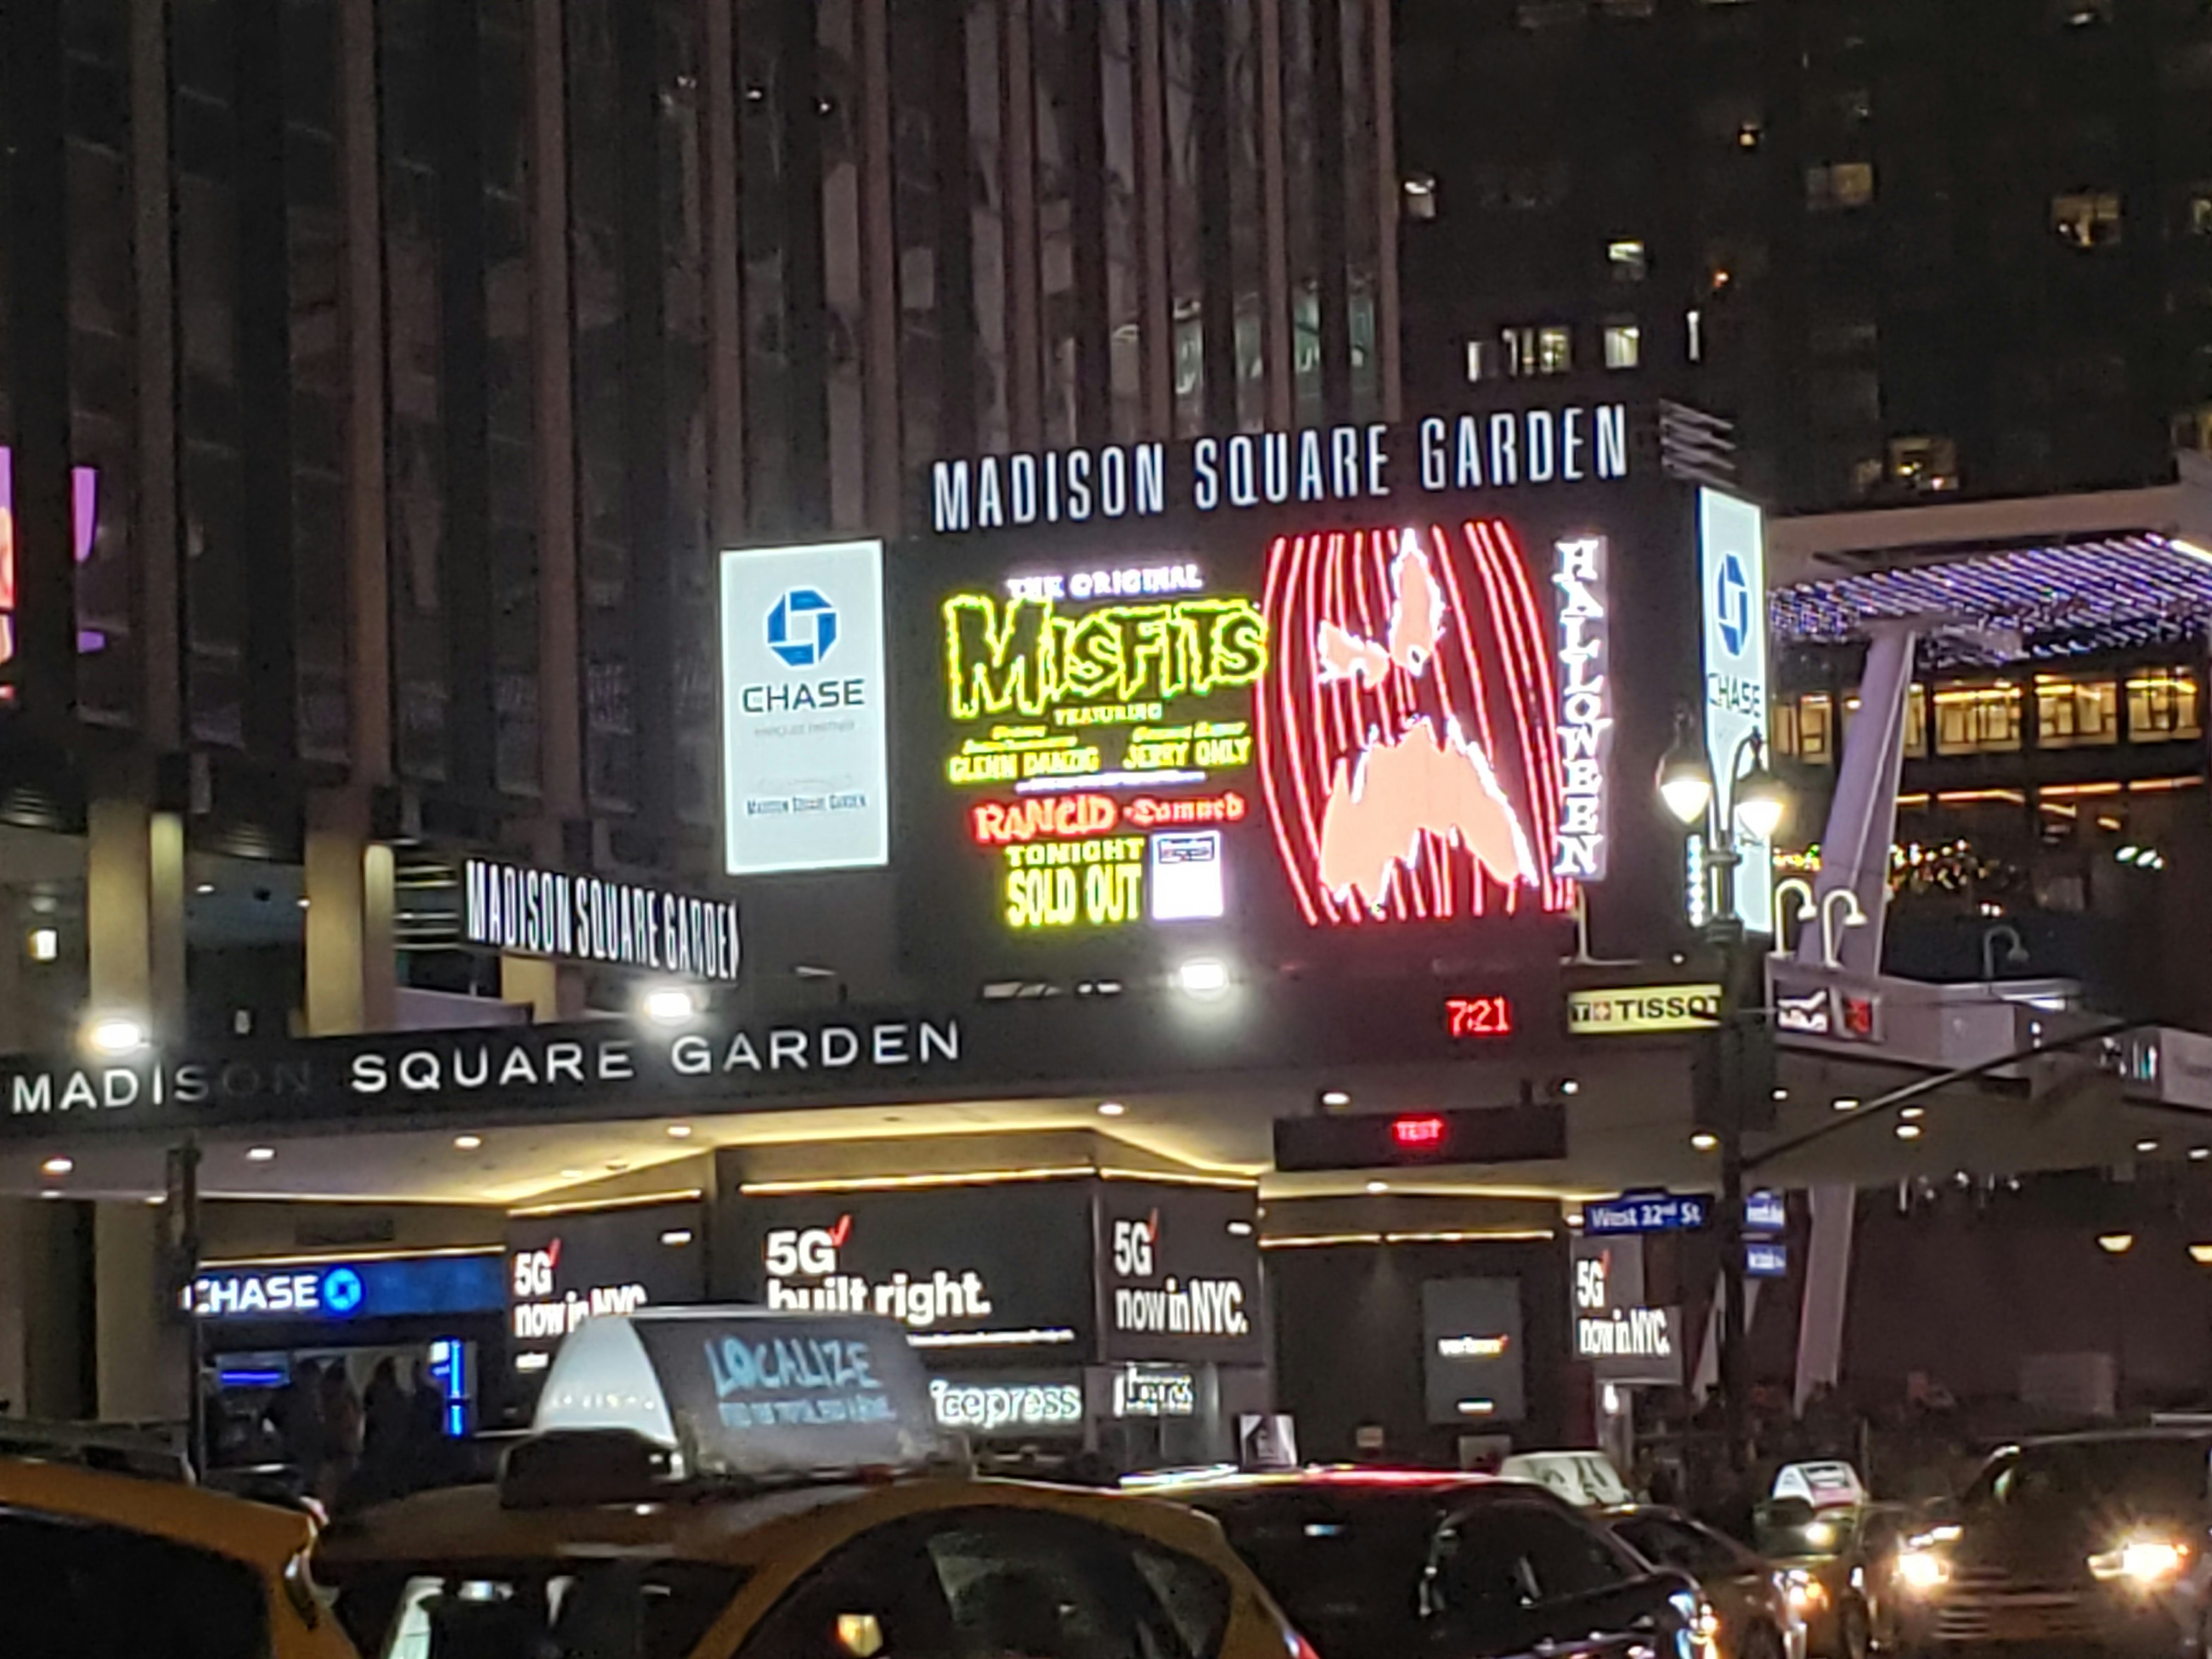 The bright lights of Madison Square Garden advertise a Misfits concert with Rancid over a line of taxi cabs in the street.